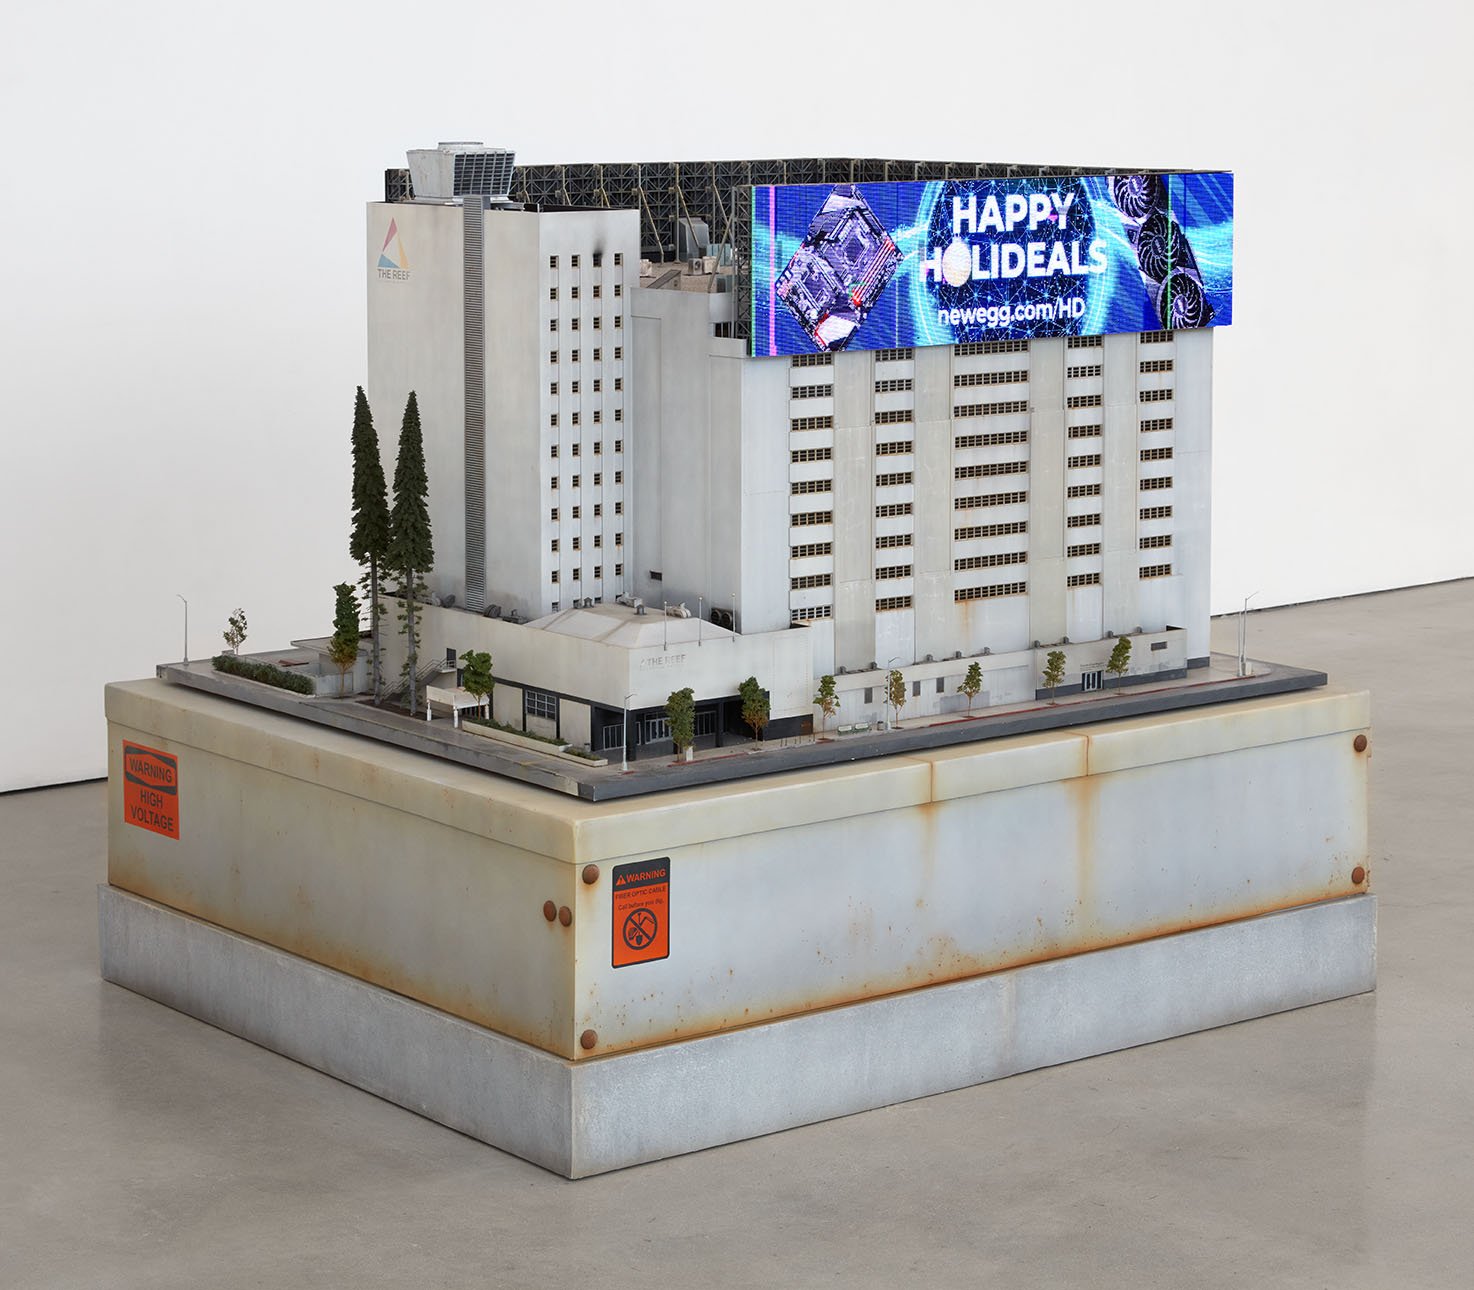   Halloween City , 2022. LED screens with acrylic paint on 3D printed PLA and MDF. 57 x 46 x 32 inches 